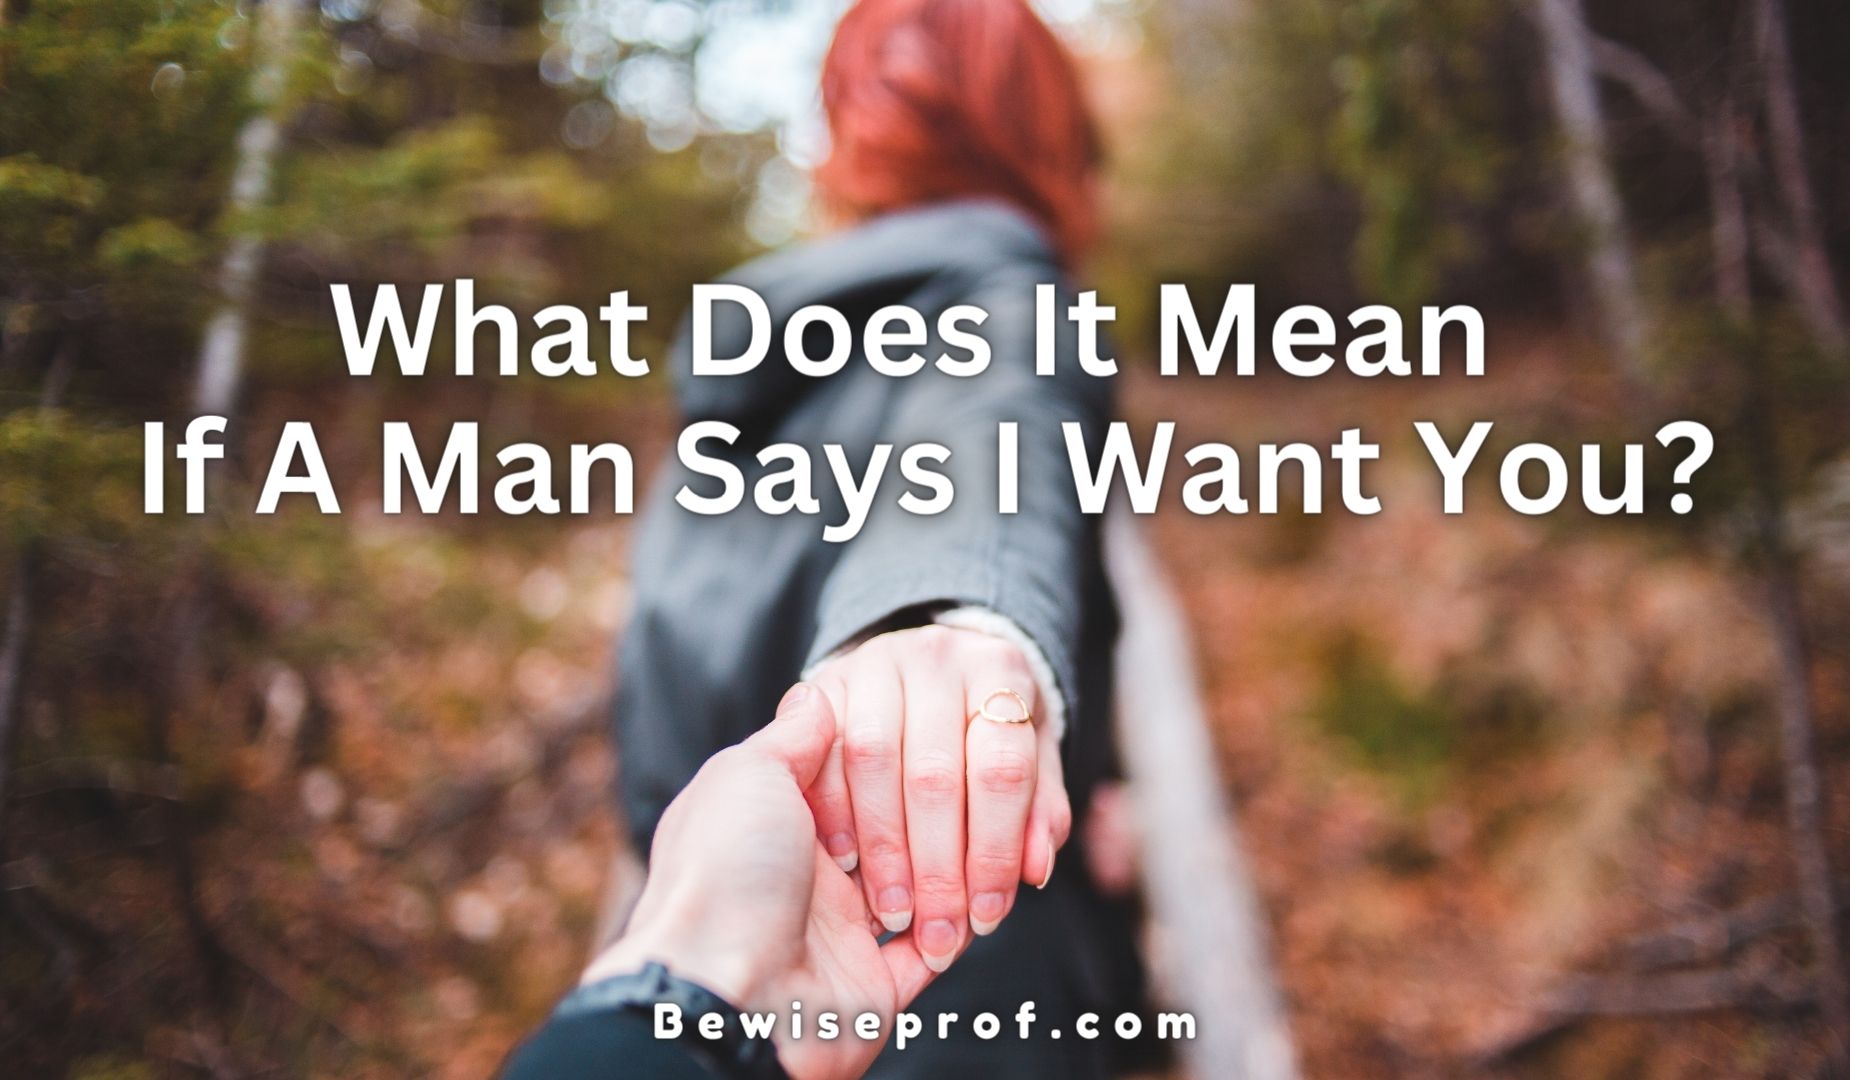 What Does It Mean If A Man Says I Want You?